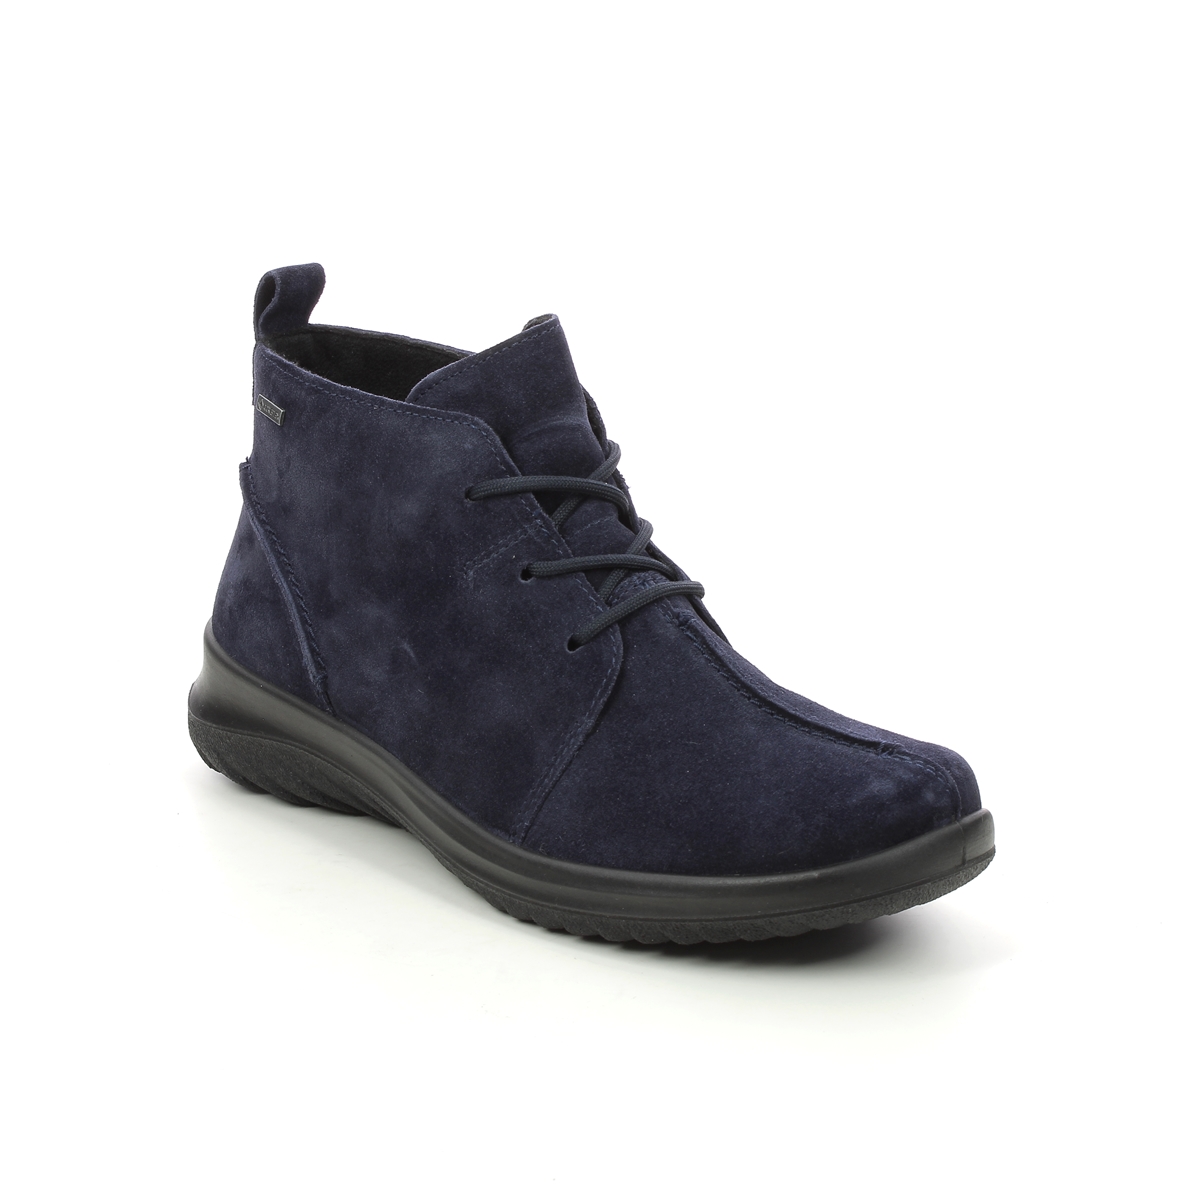 Legero Soft Lace Gtx Navy Suede Womens Lace Up Boots 2009569-8300 In Size 7.5 In Plain Navy Suede